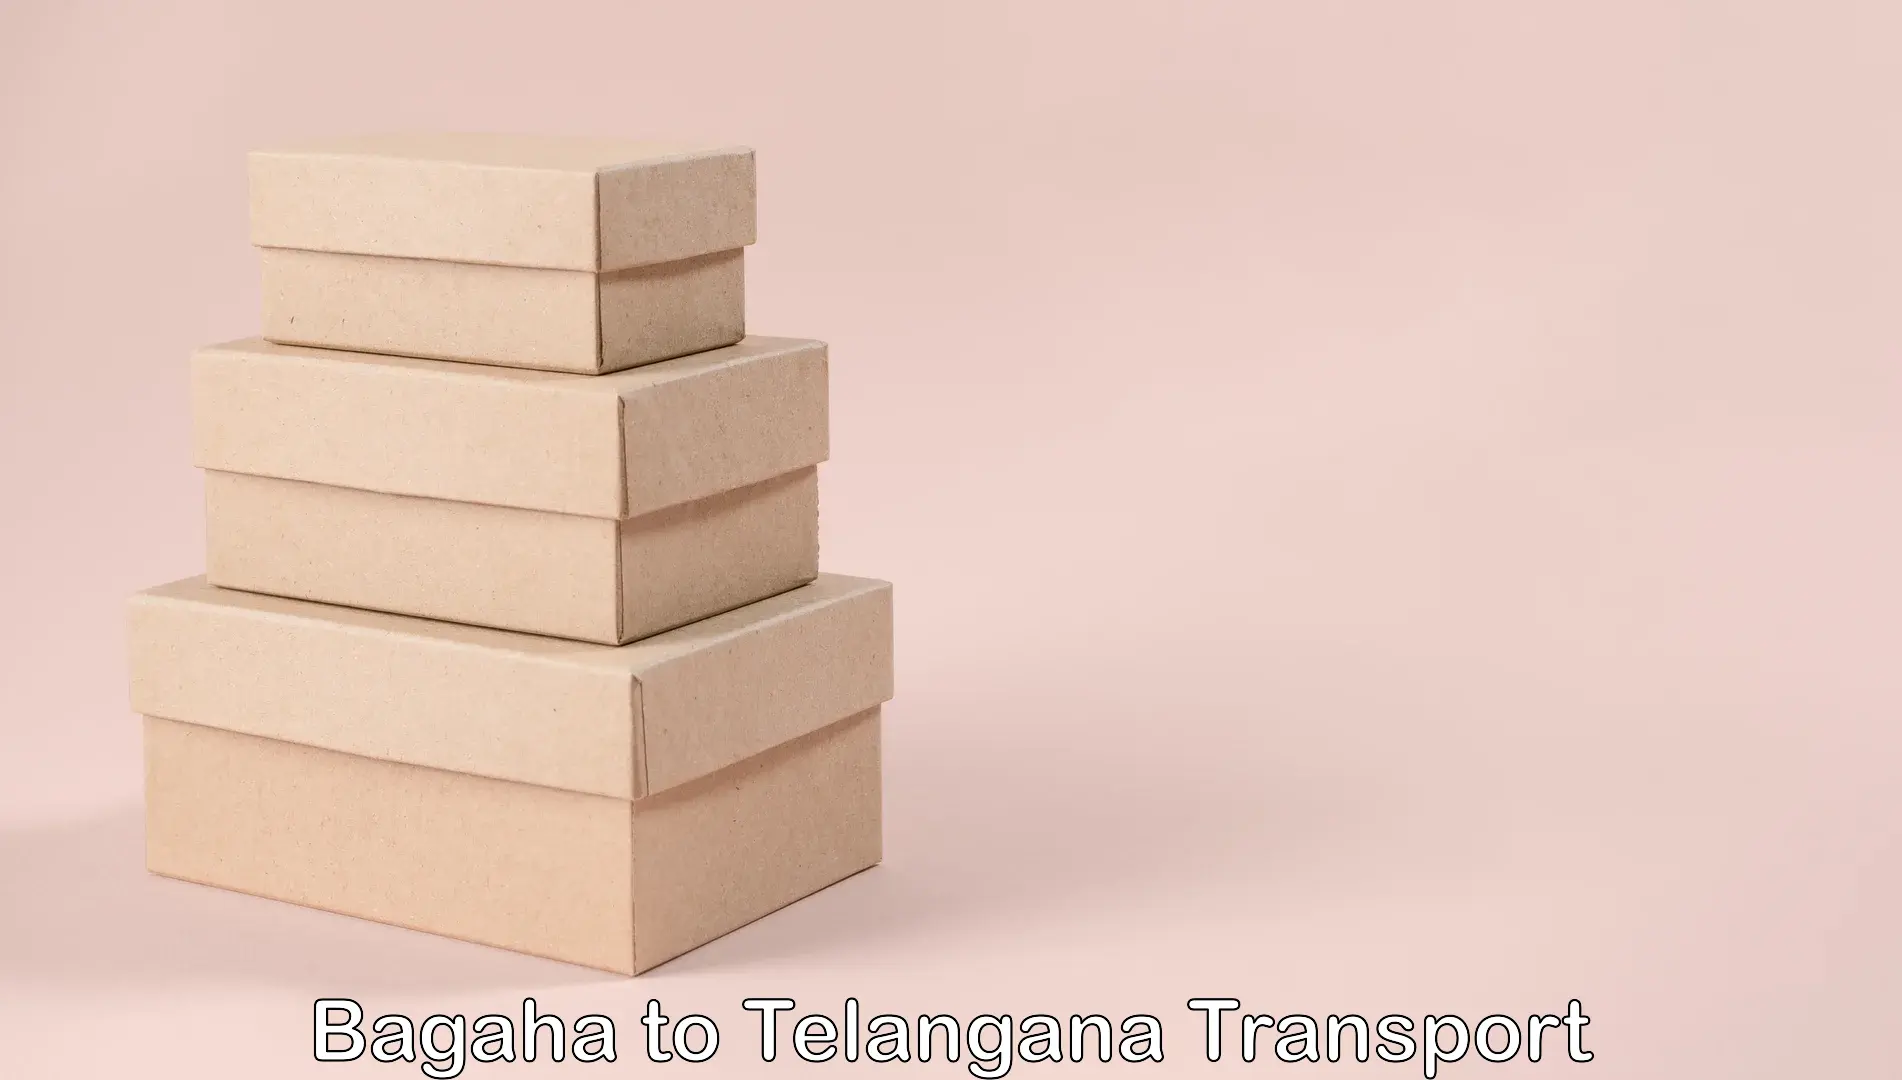 Truck transport companies in India Bagaha to Netrang